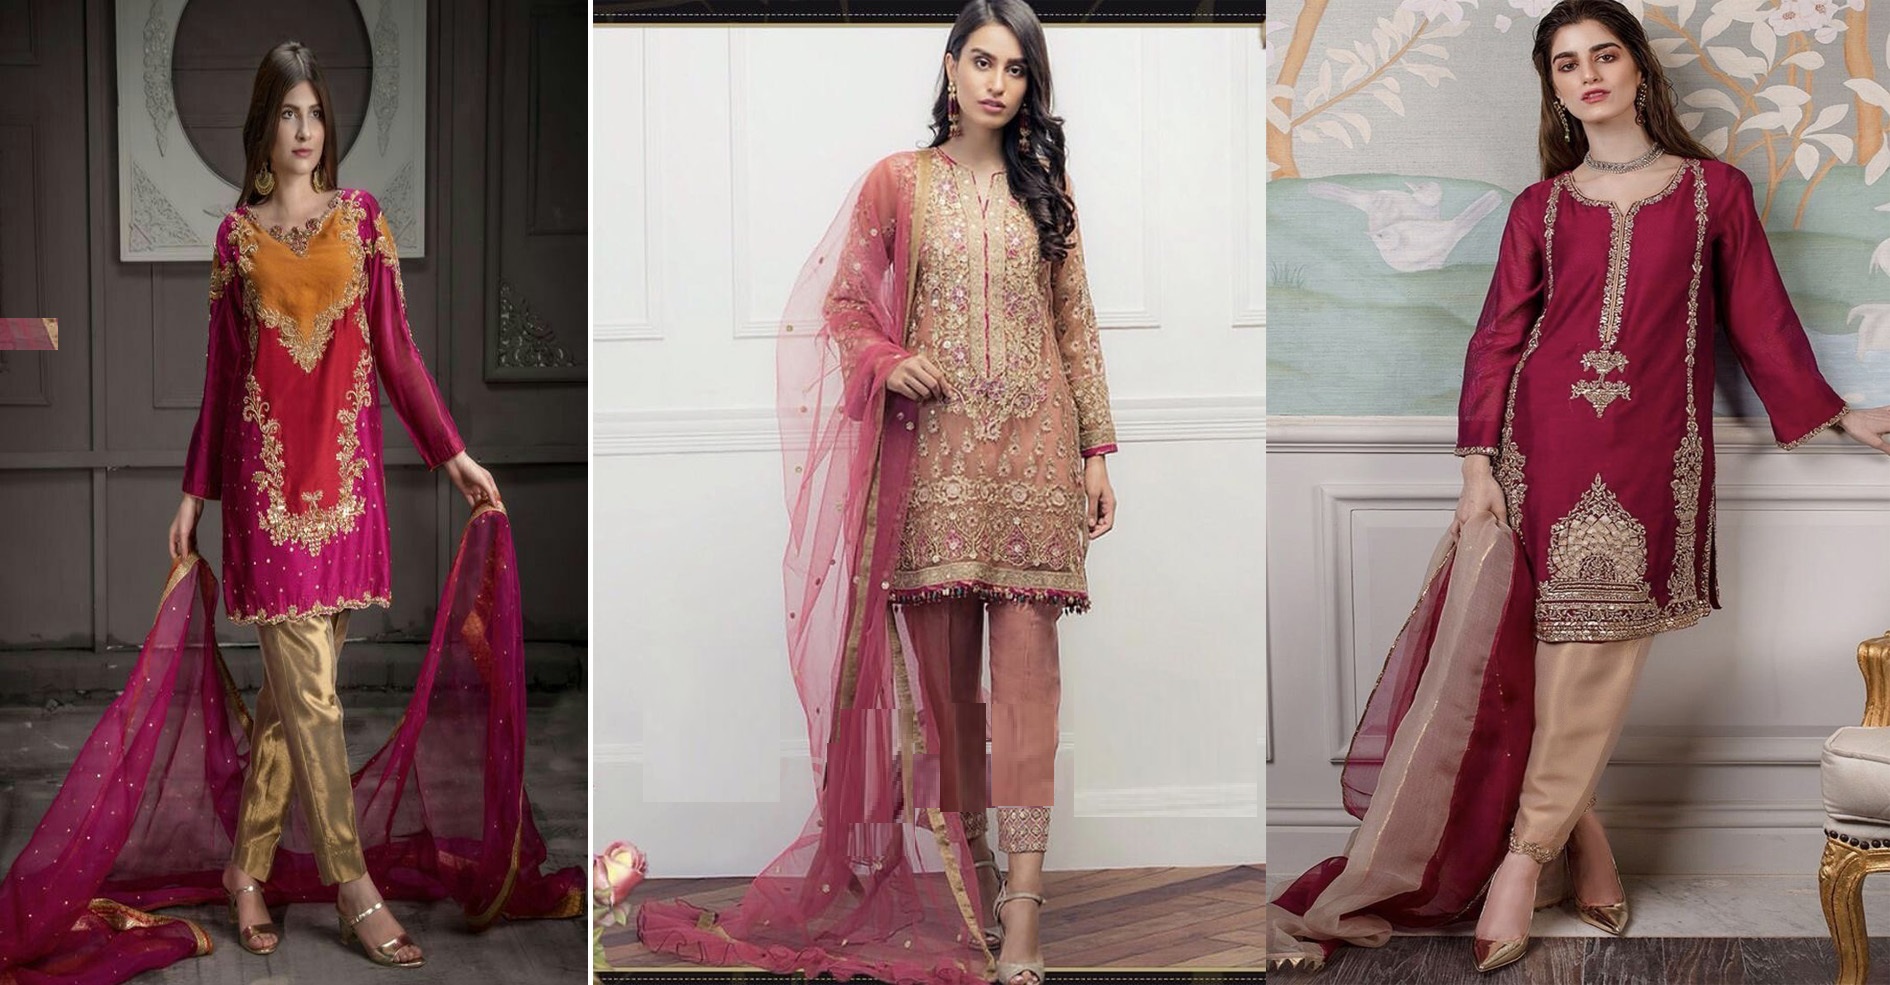 The Beauty Of Pakistani Wedding Dresses: A Cultural Perspective